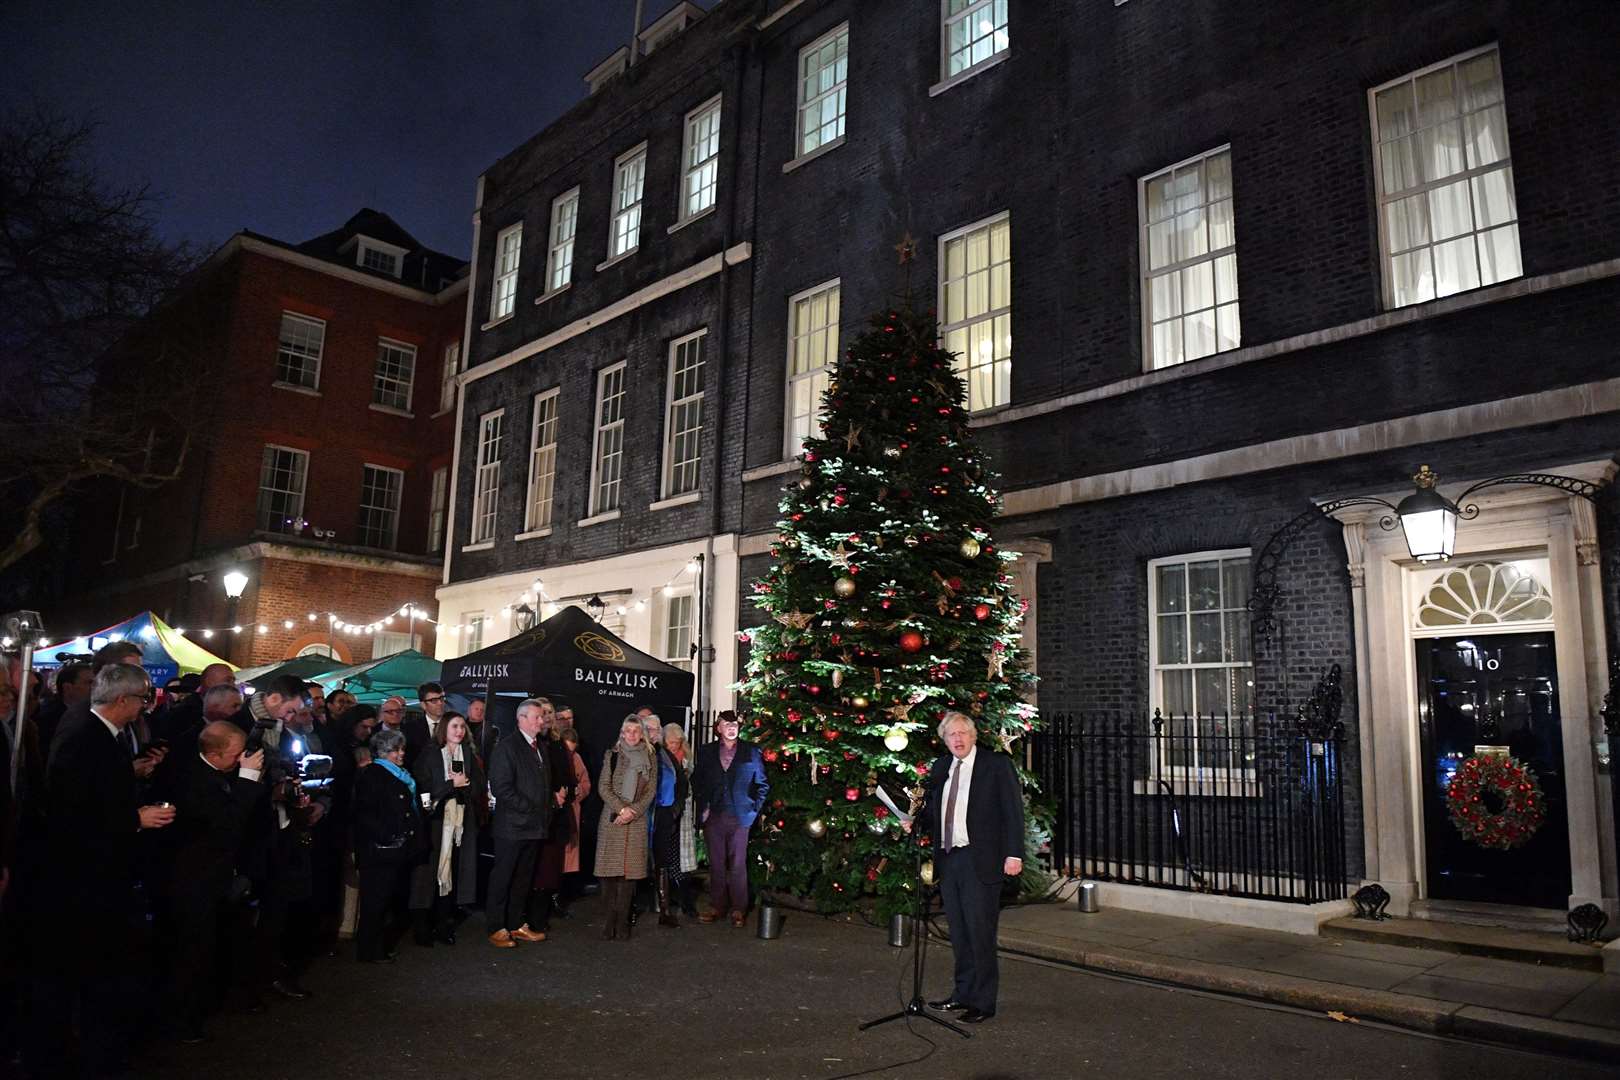 Downing Street insists Covid rules were followed by staff leading up to last Christmas